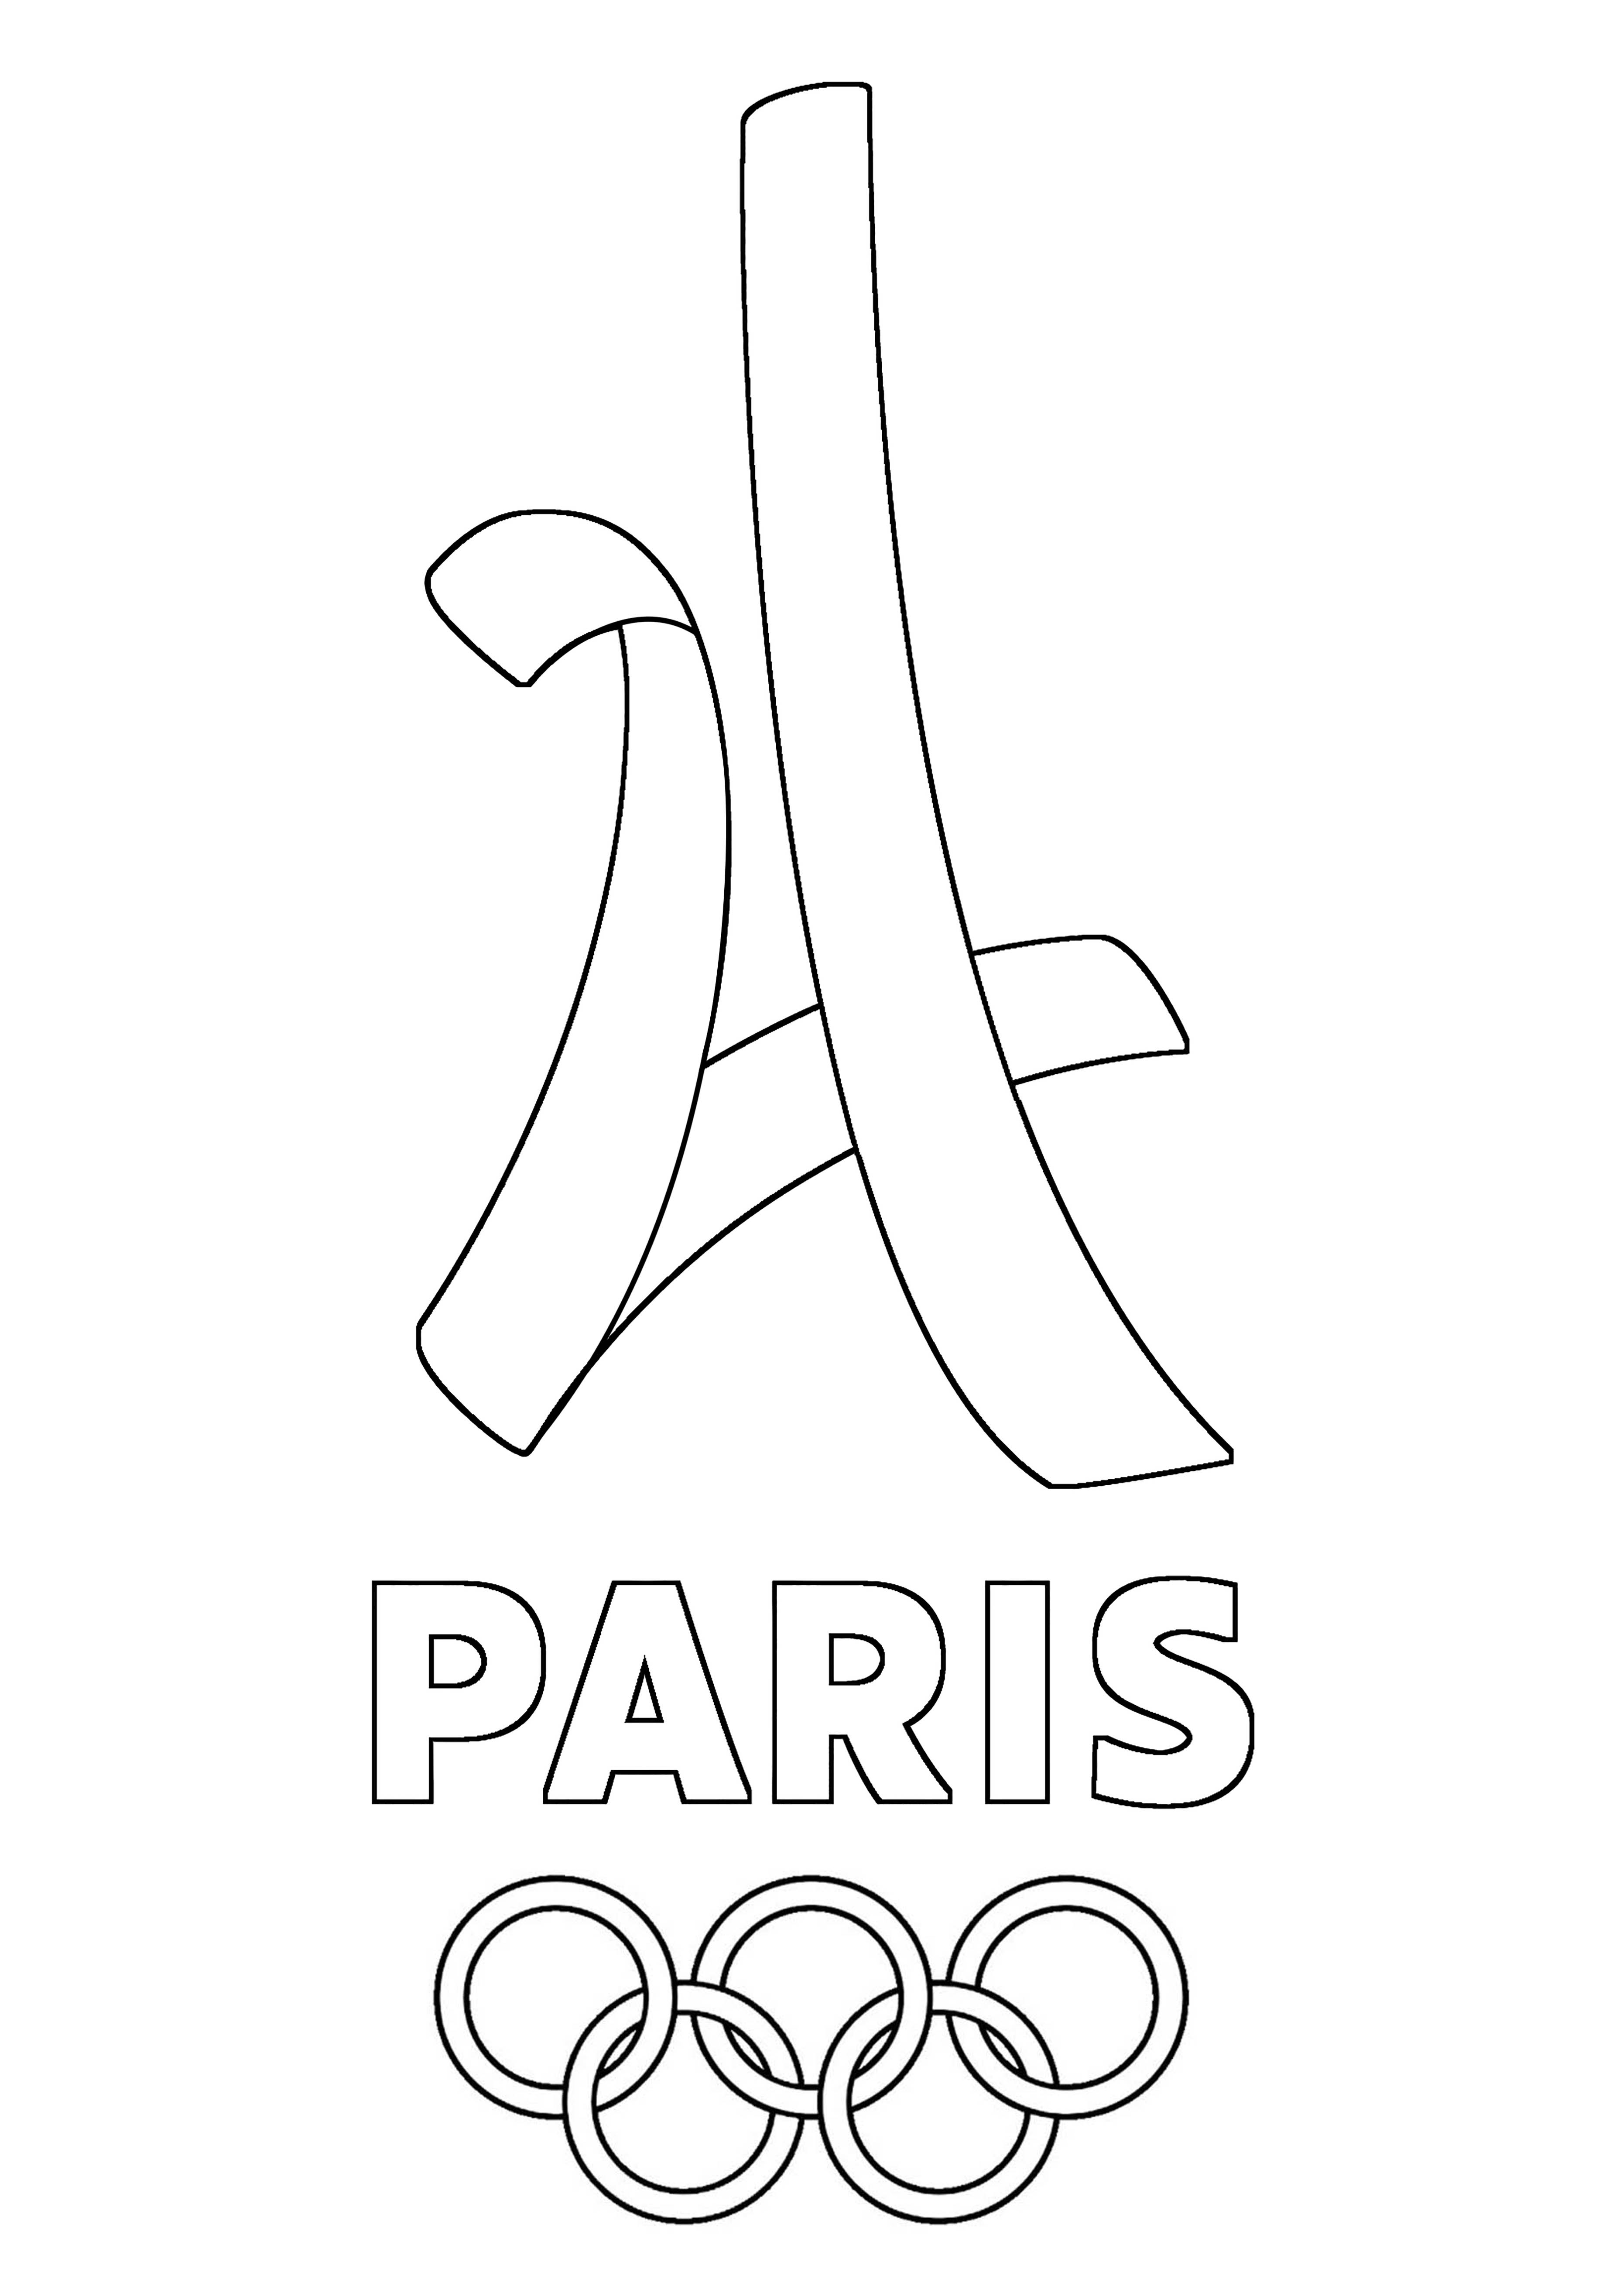 Simple Olympic Games coloring page for kids